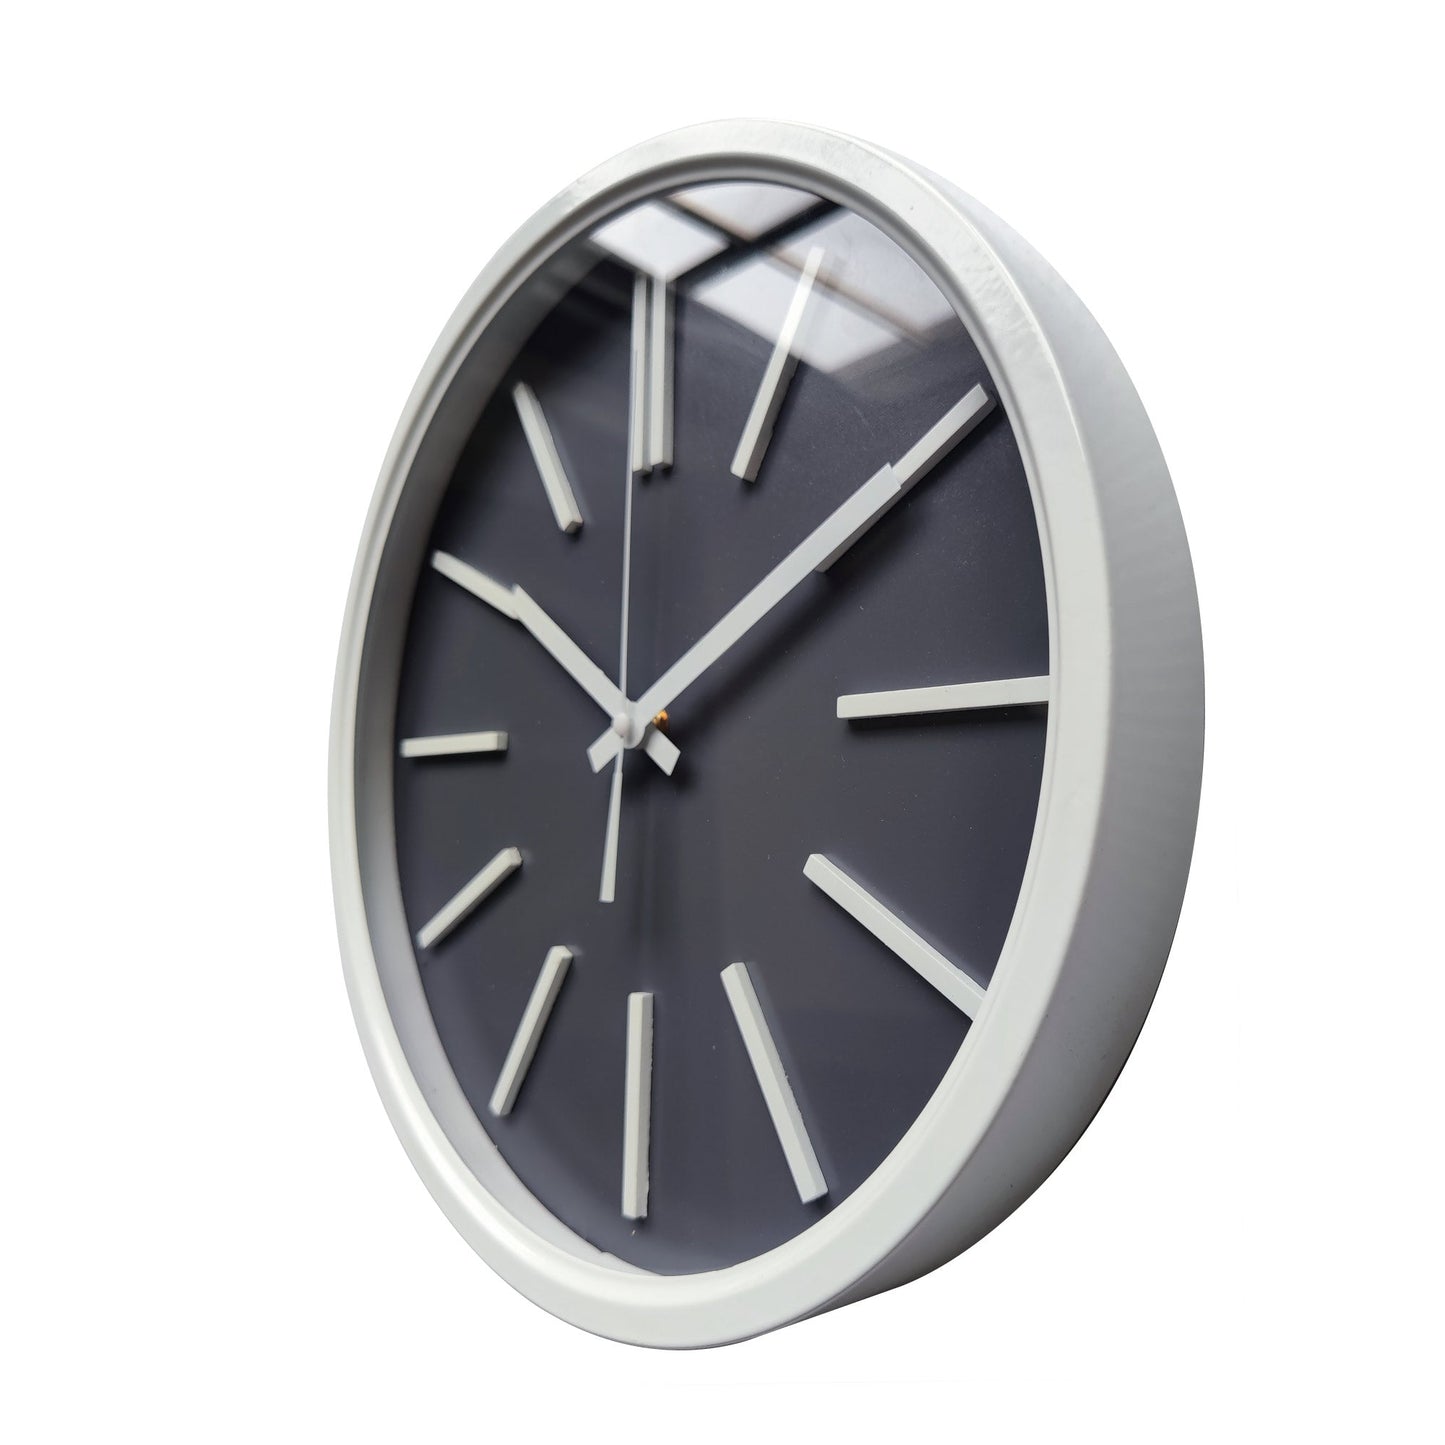 Wall Clock - Grey and White 35x35x5.5cm